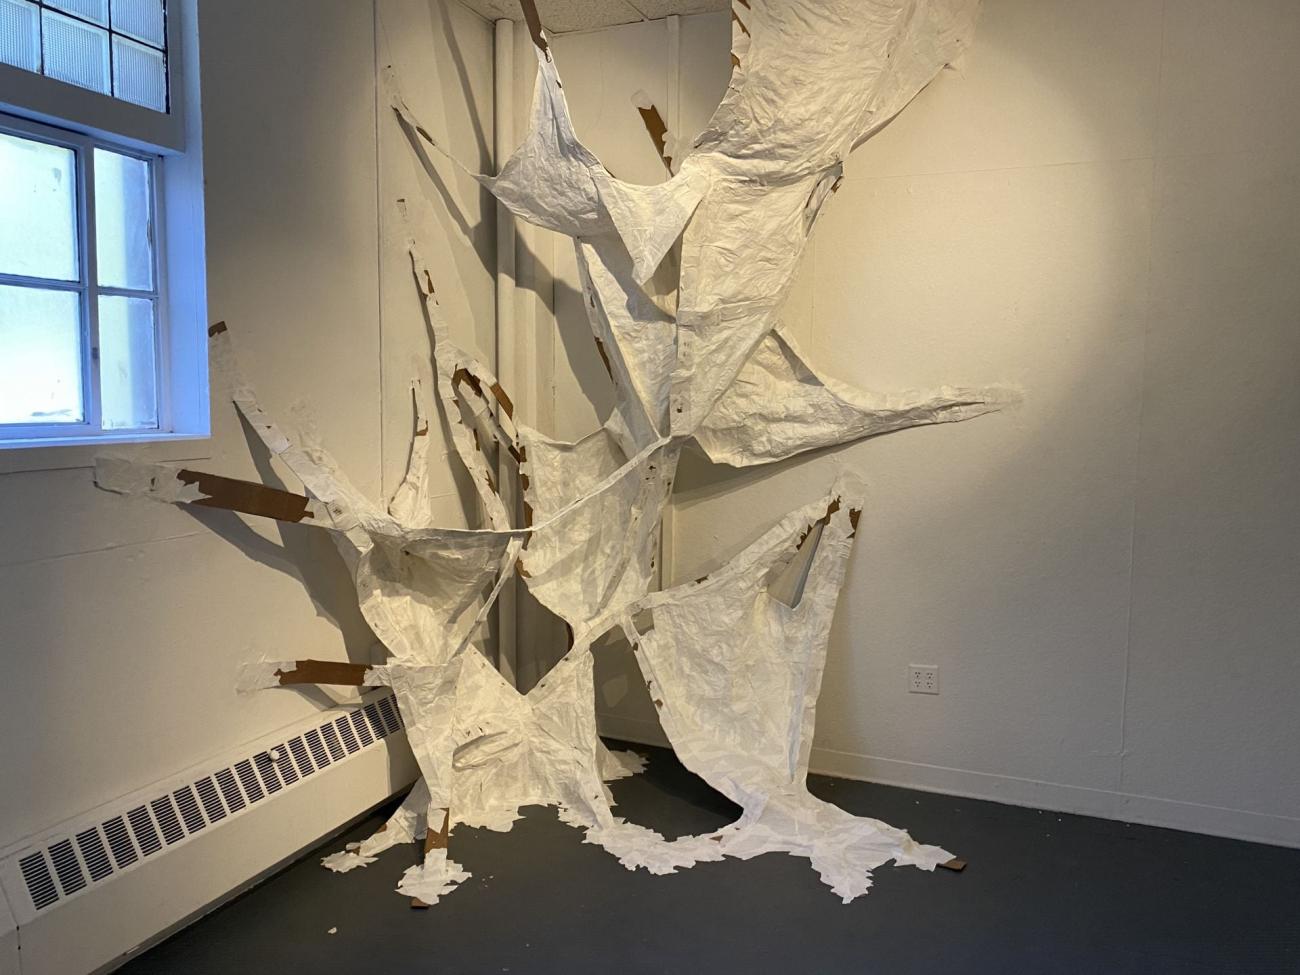 tattered white sheets of some lightweight material hang in the corner of a room like worn-out sails, connected by cardboard strips